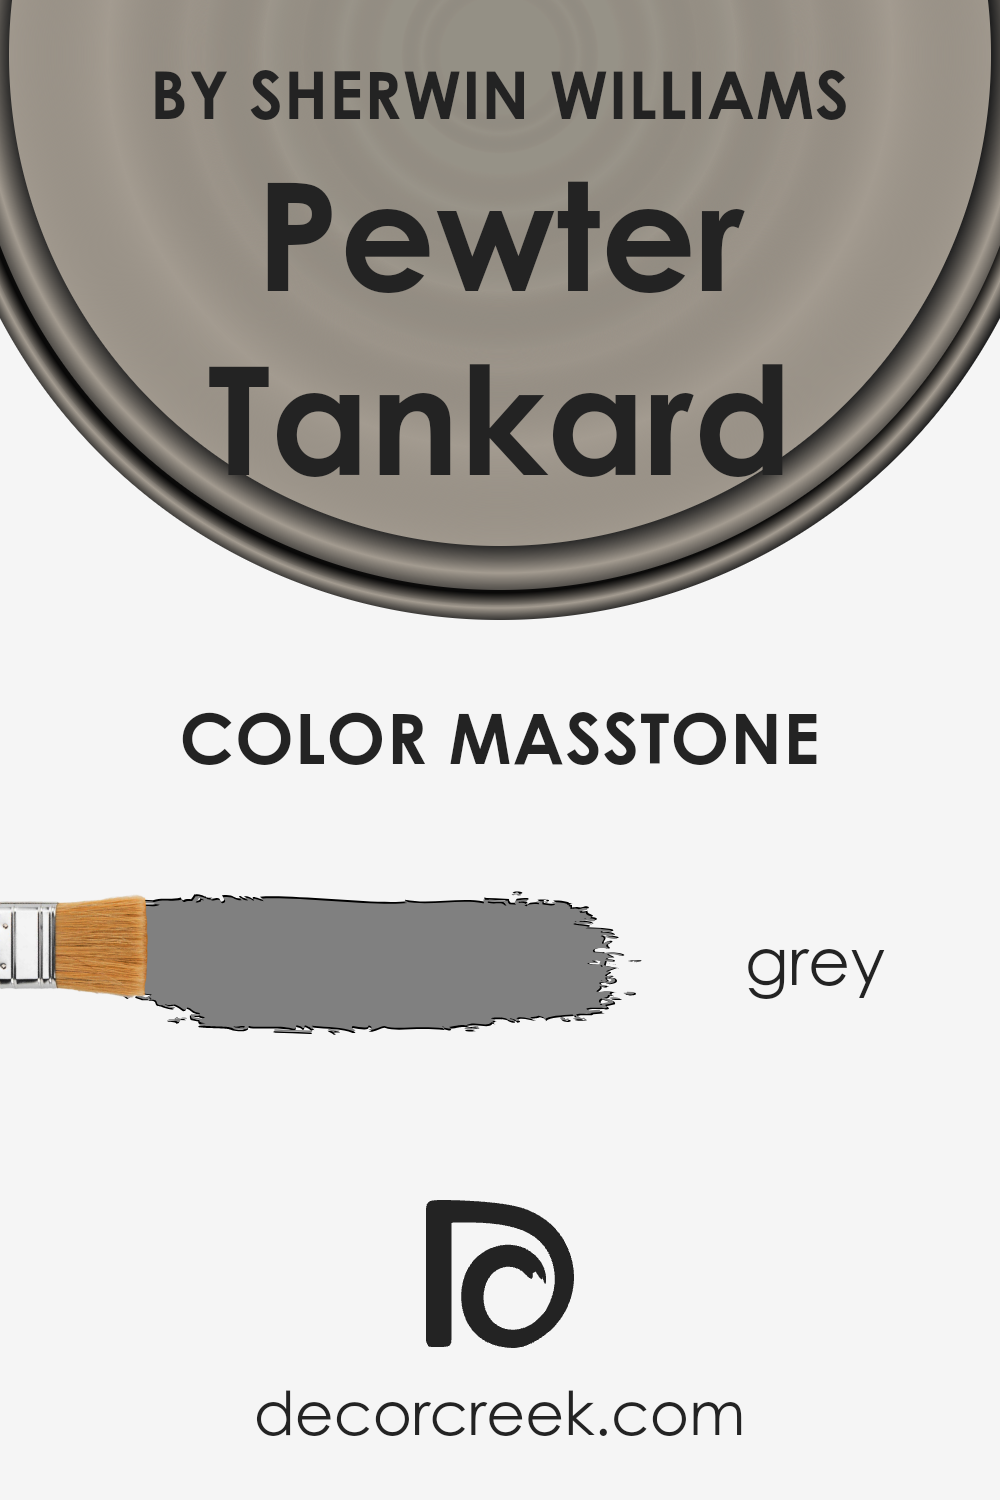 what_is_the_masstone_of_pewter_tankard_sw_0023